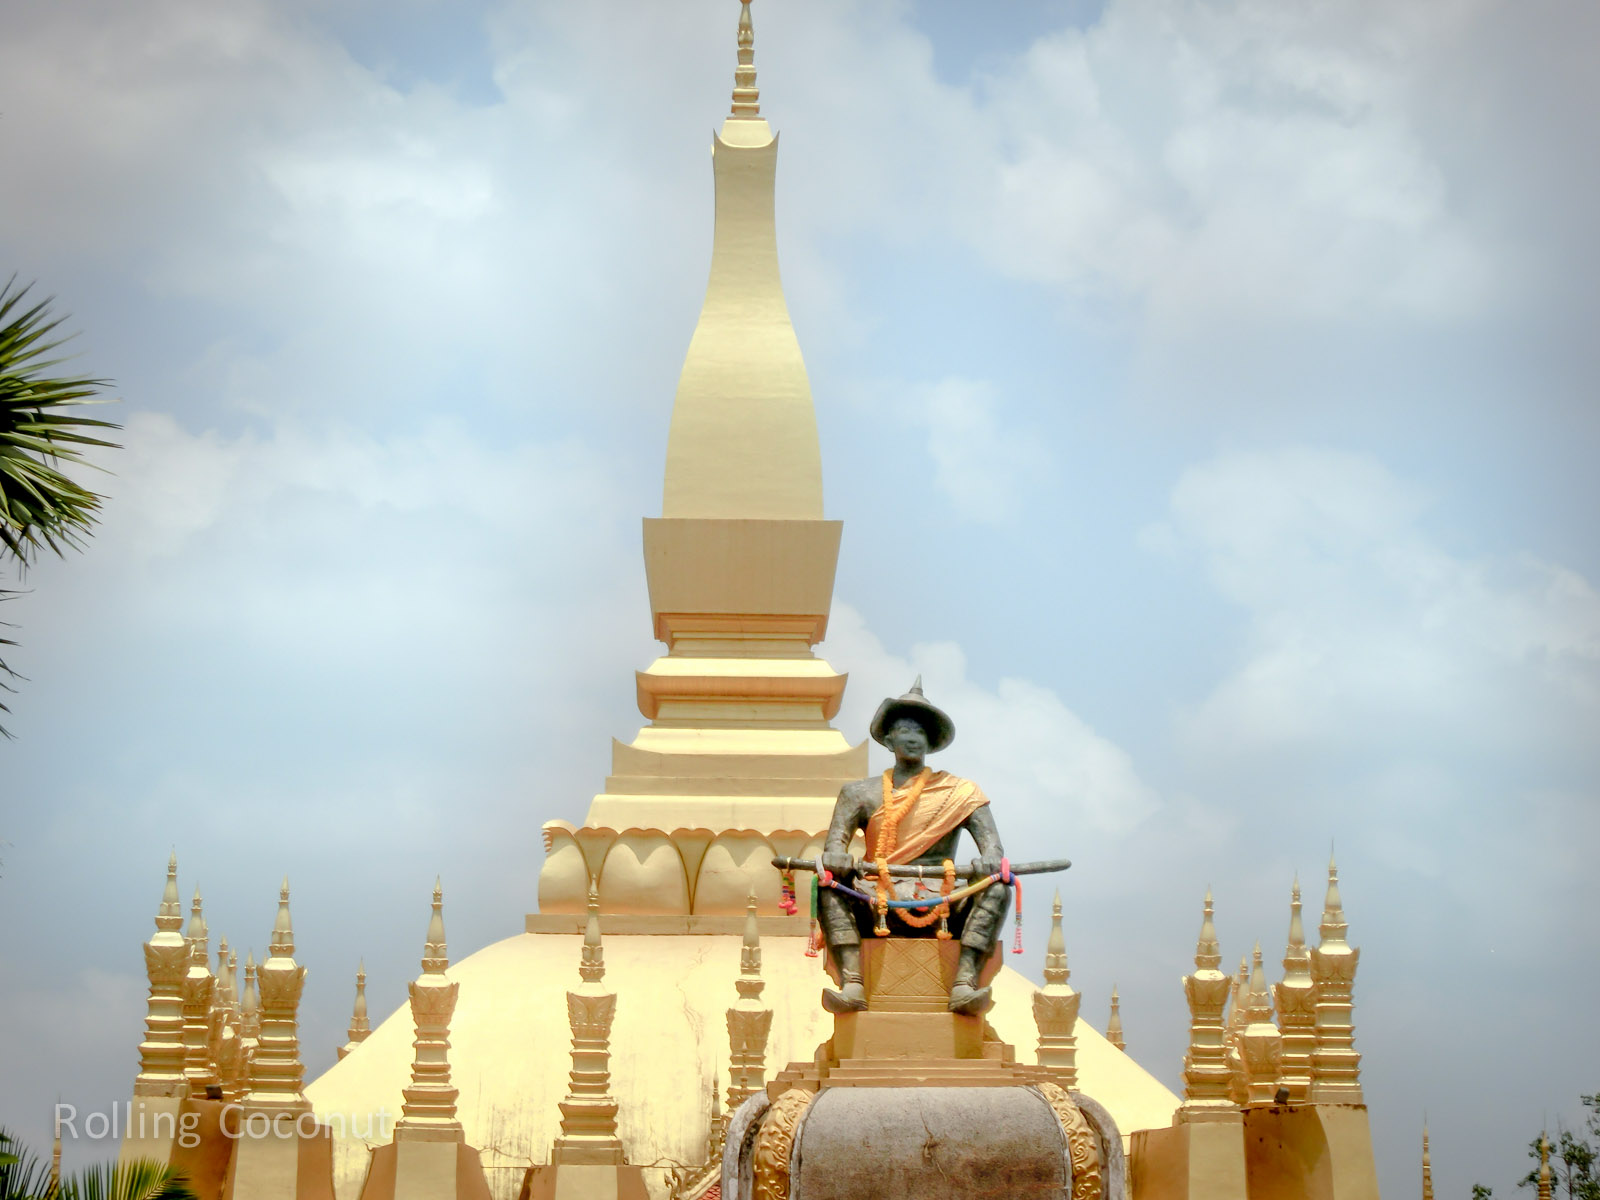 Pha That Luang Stupa Statue Vientiane Laos Rolling Coconut Ooaworld Photo Ooaworld